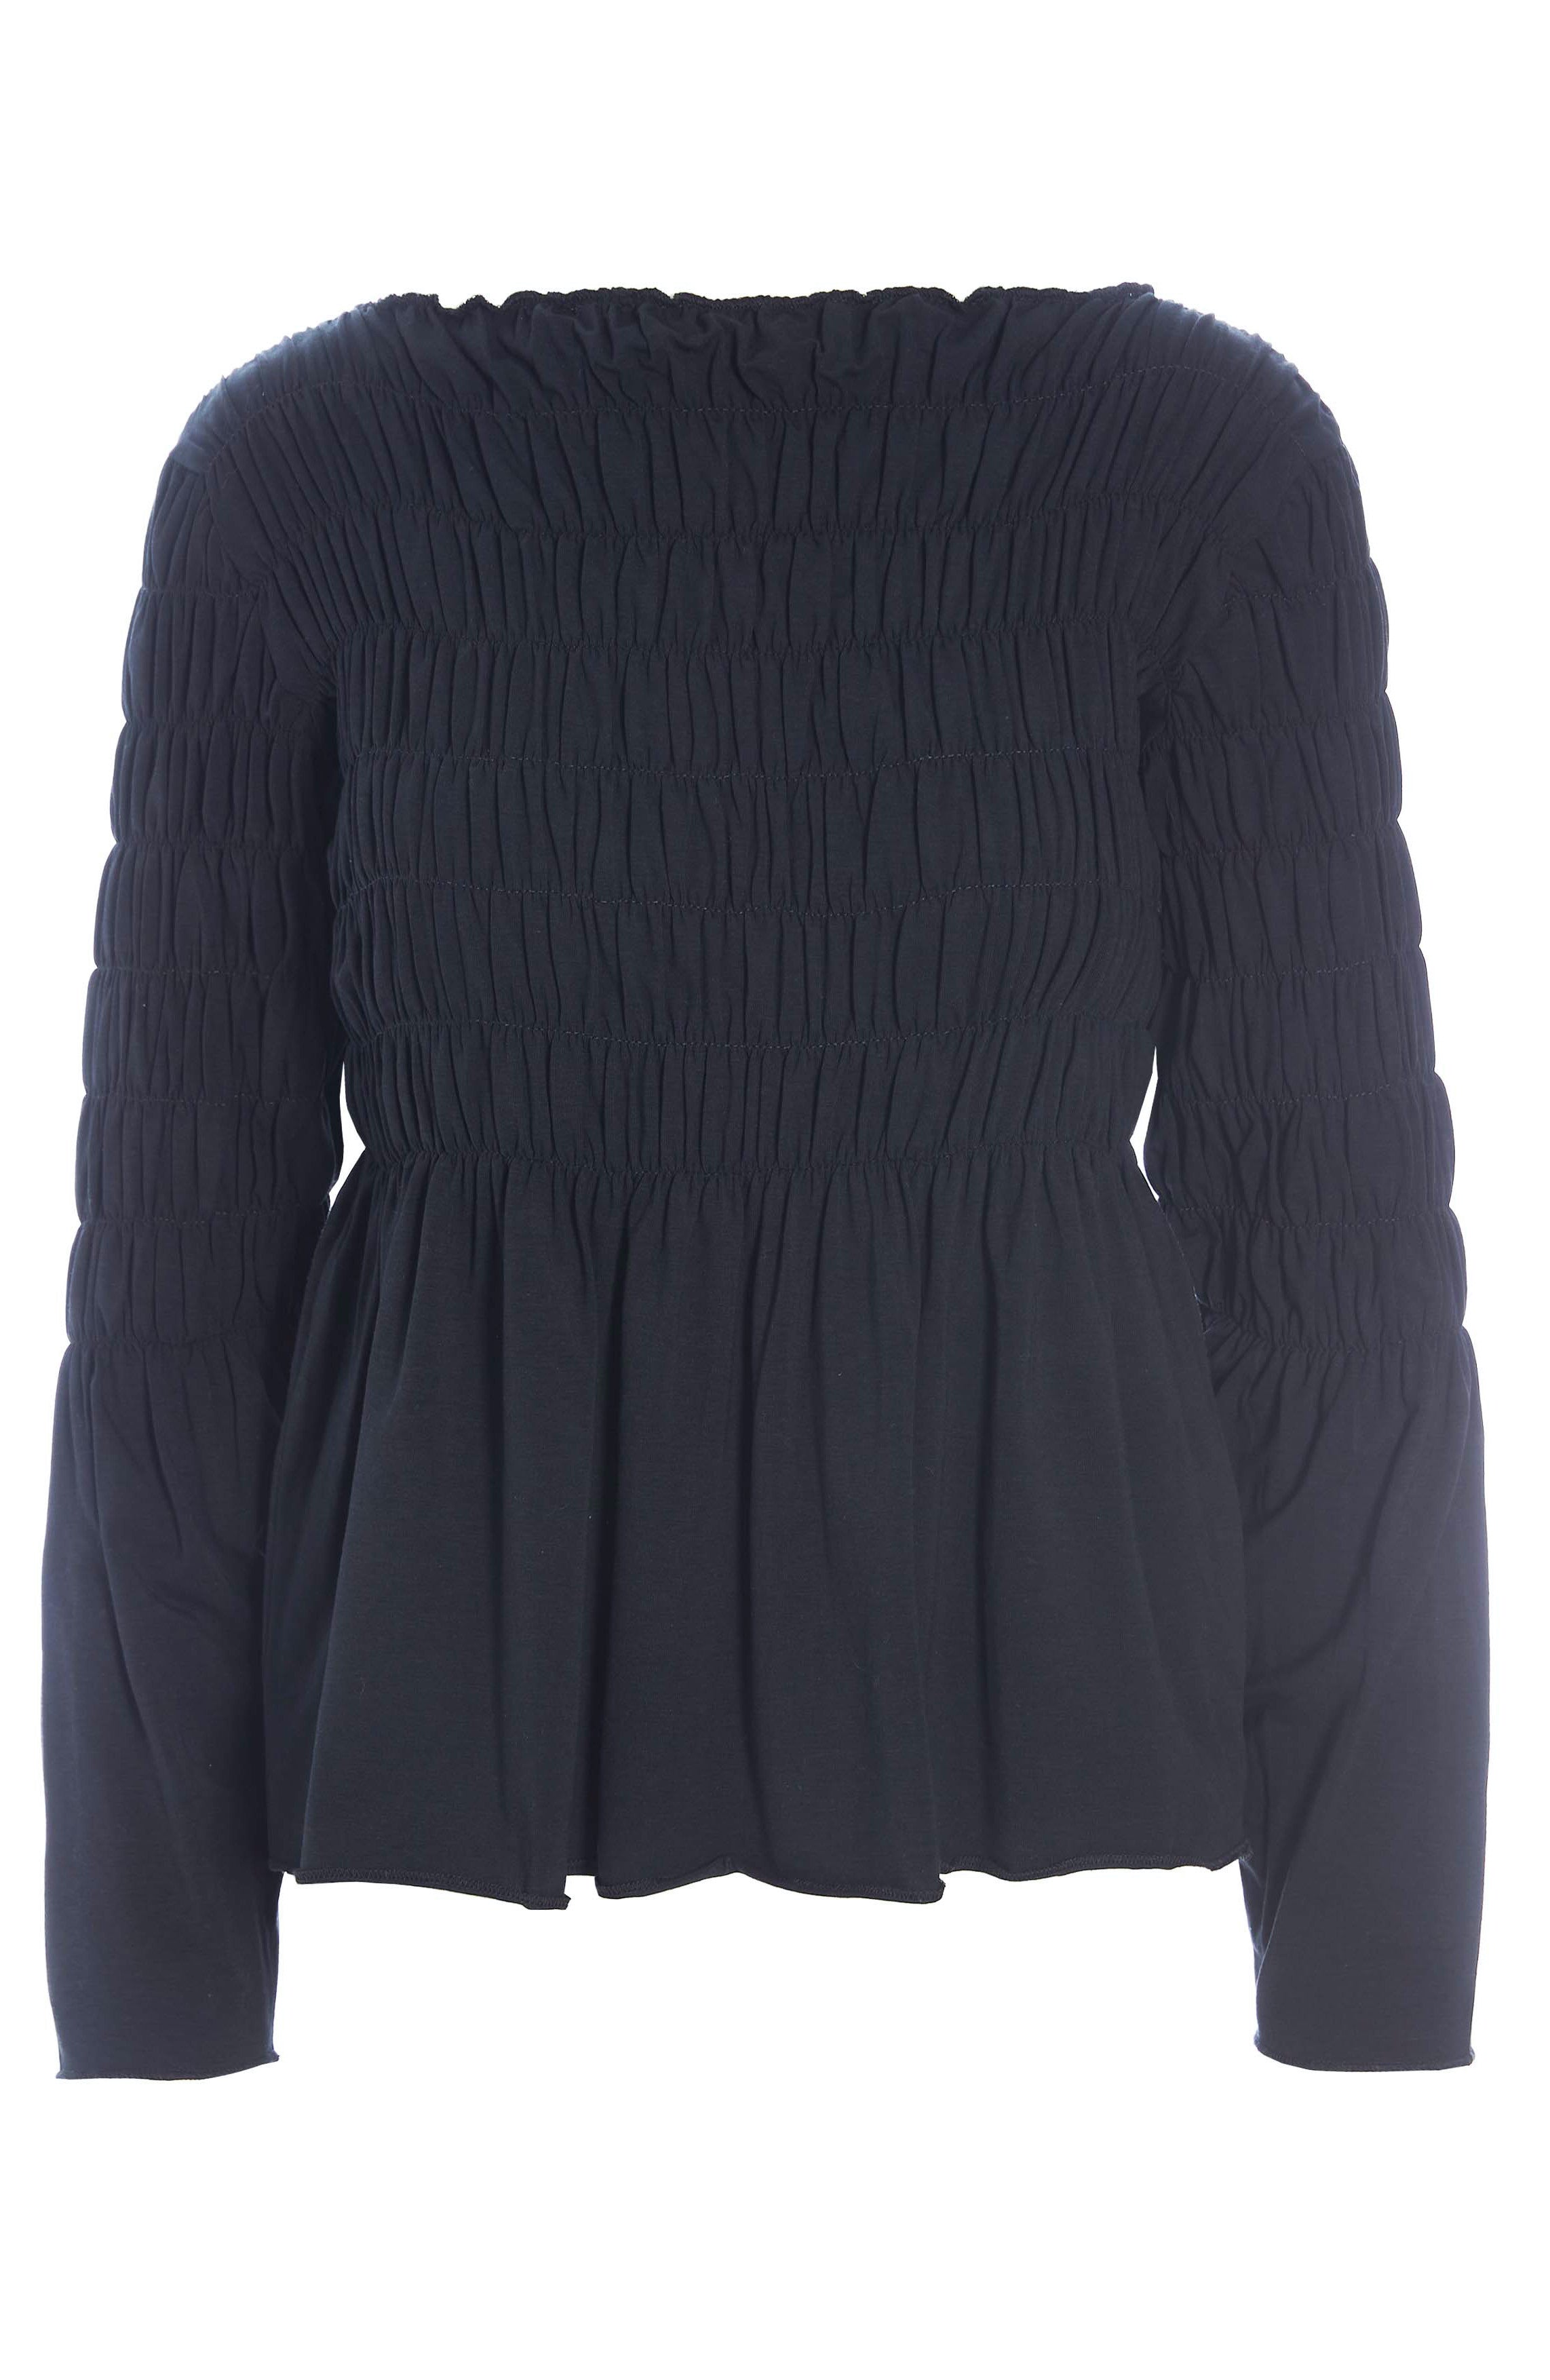 front view of the bitte kai rand atlas blouse in black. This blouse features a stitched gathering (smocking) on the top half of the top and sleeves that causes a peplum-like flare out from the waist and elbows.